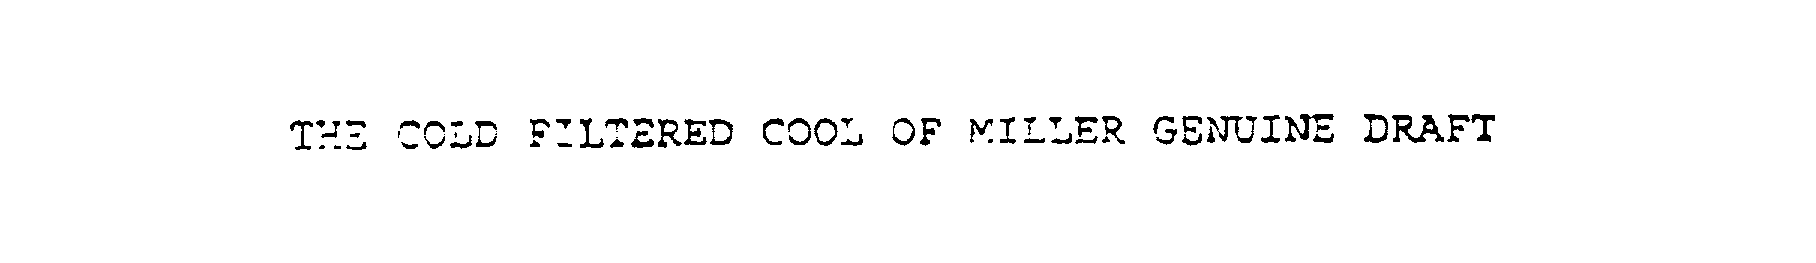 Trademark Logo THE COLD FILTERED COOL OF MILLER GENUINE DRAFT